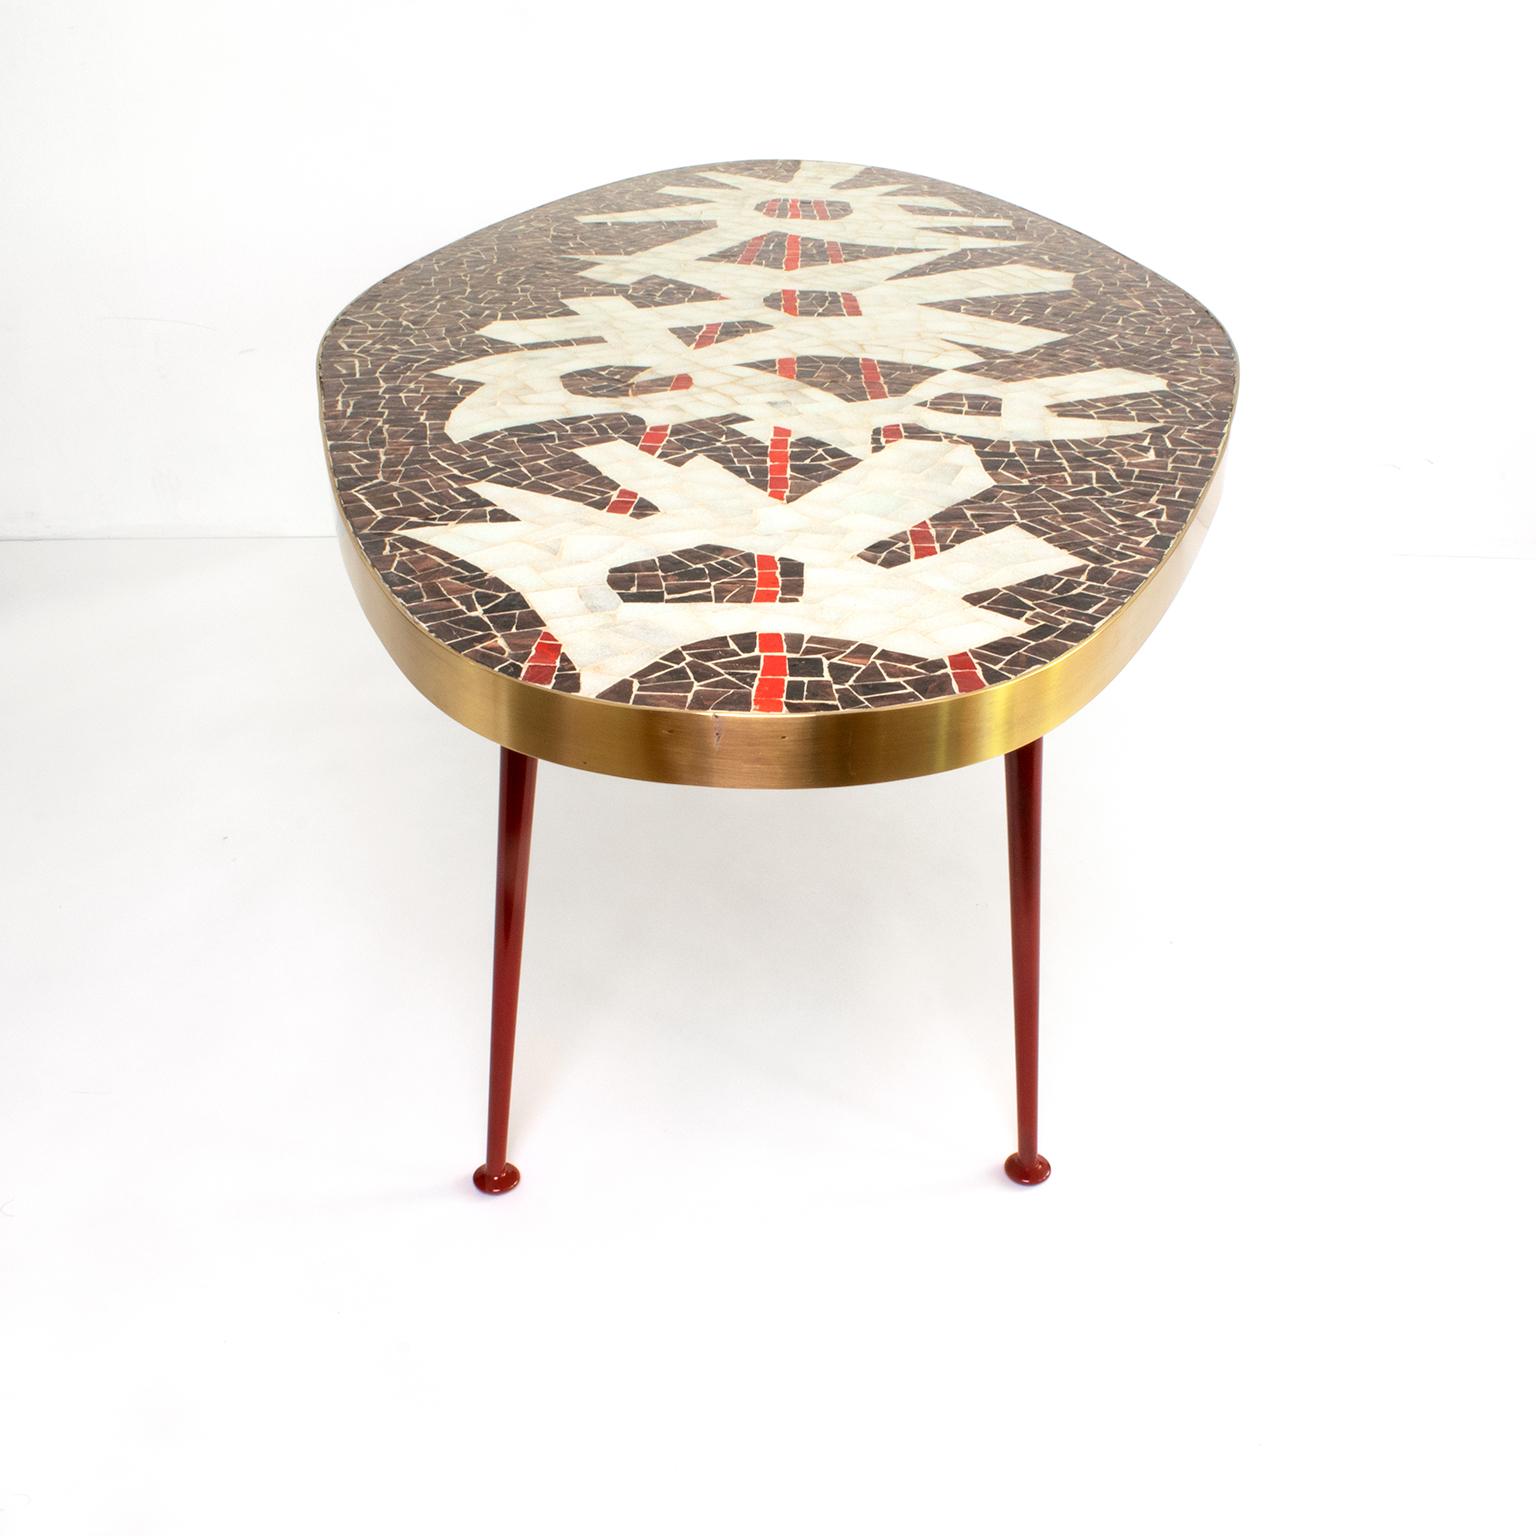 Polished Oval Form Midcentury Mosaic Coffee Table Brass body Designed by Berthold Muller